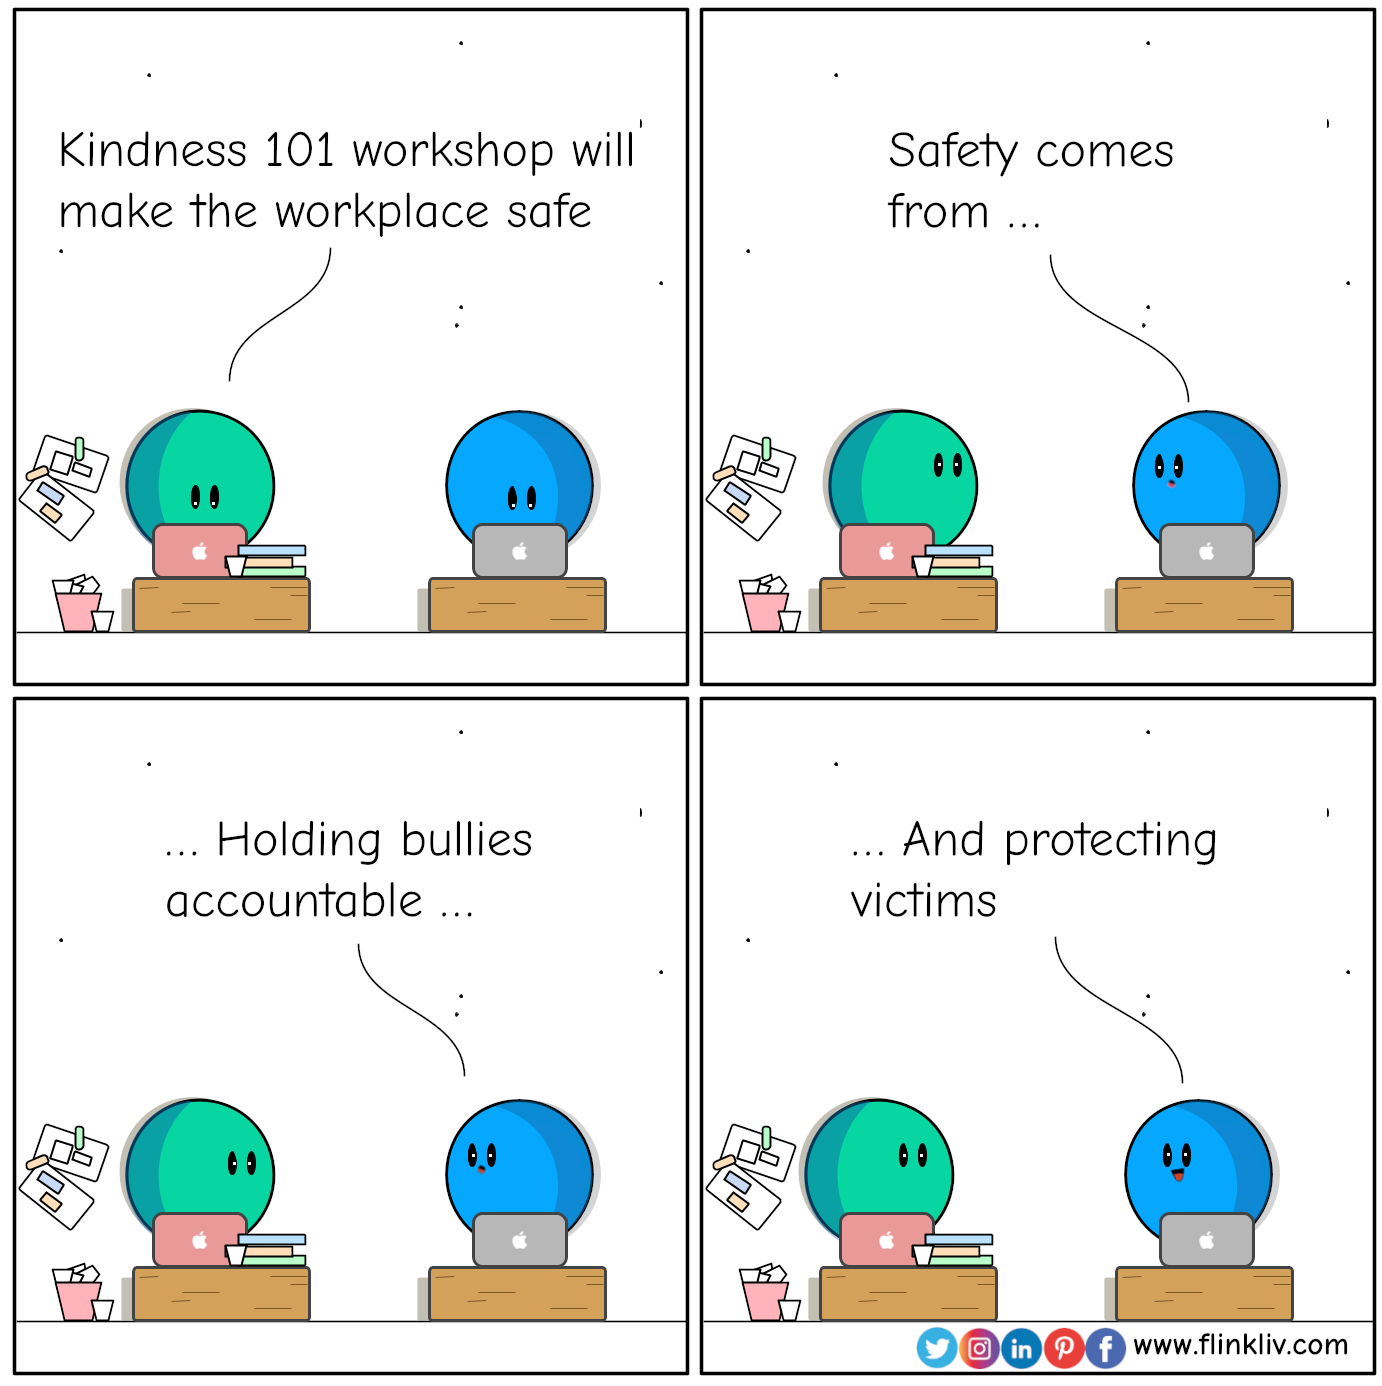 Conversation between A and B about how to create a Safe workplace. 
				A: Kindness 101 workshop will make the workplace safe
				B: Safety comes from holding bullies accountable, enforcing policies, and protecting victims.
				By flinkliv.com
				By Flinkliv.com
			